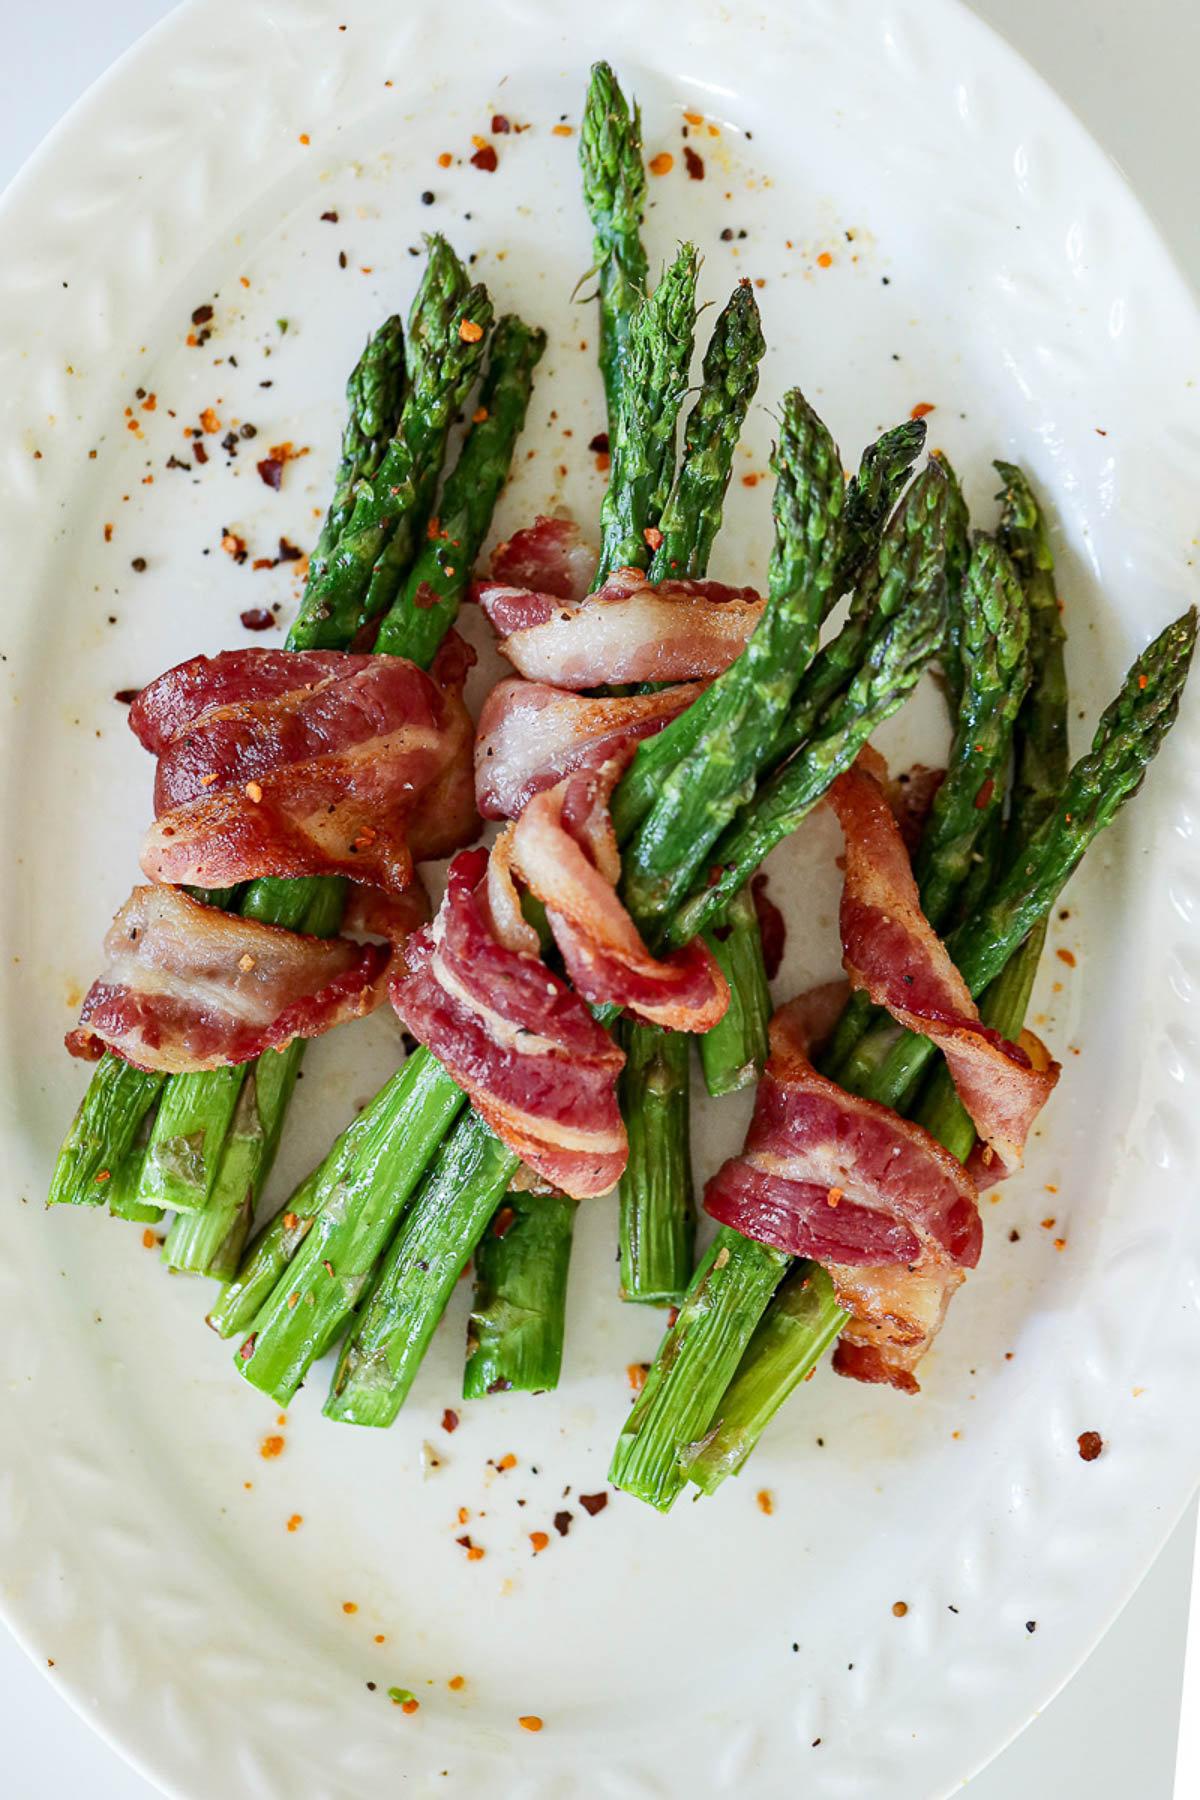 bacon-wrapped asparagus with red pepper flakes and seasonings